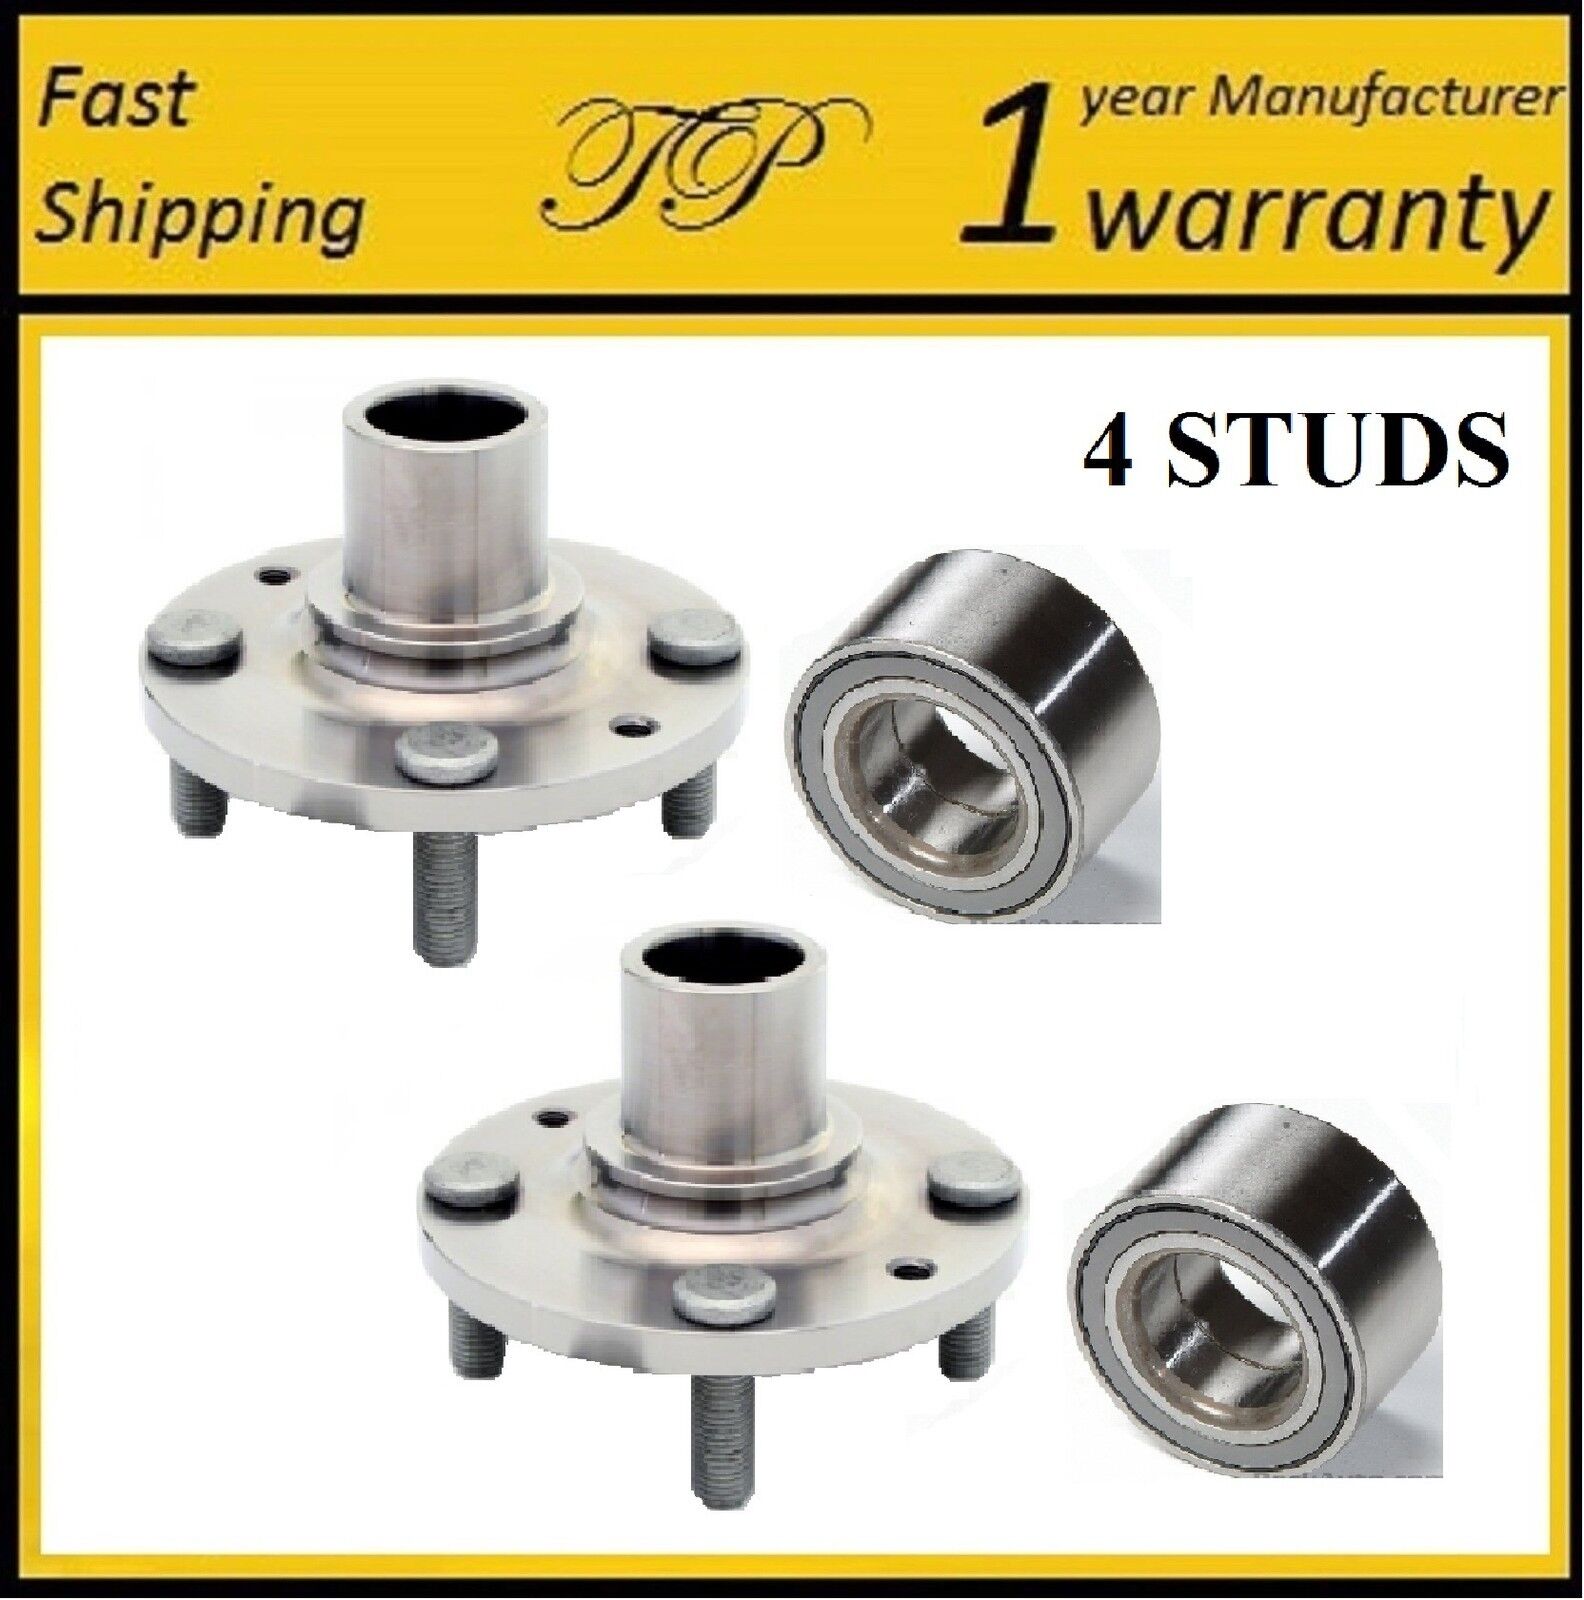 Front Wheel Hub&Bearing For 91-03 FORD ESCORT/MERCURY TRACER/MAZDA PROTEGE -PAIR